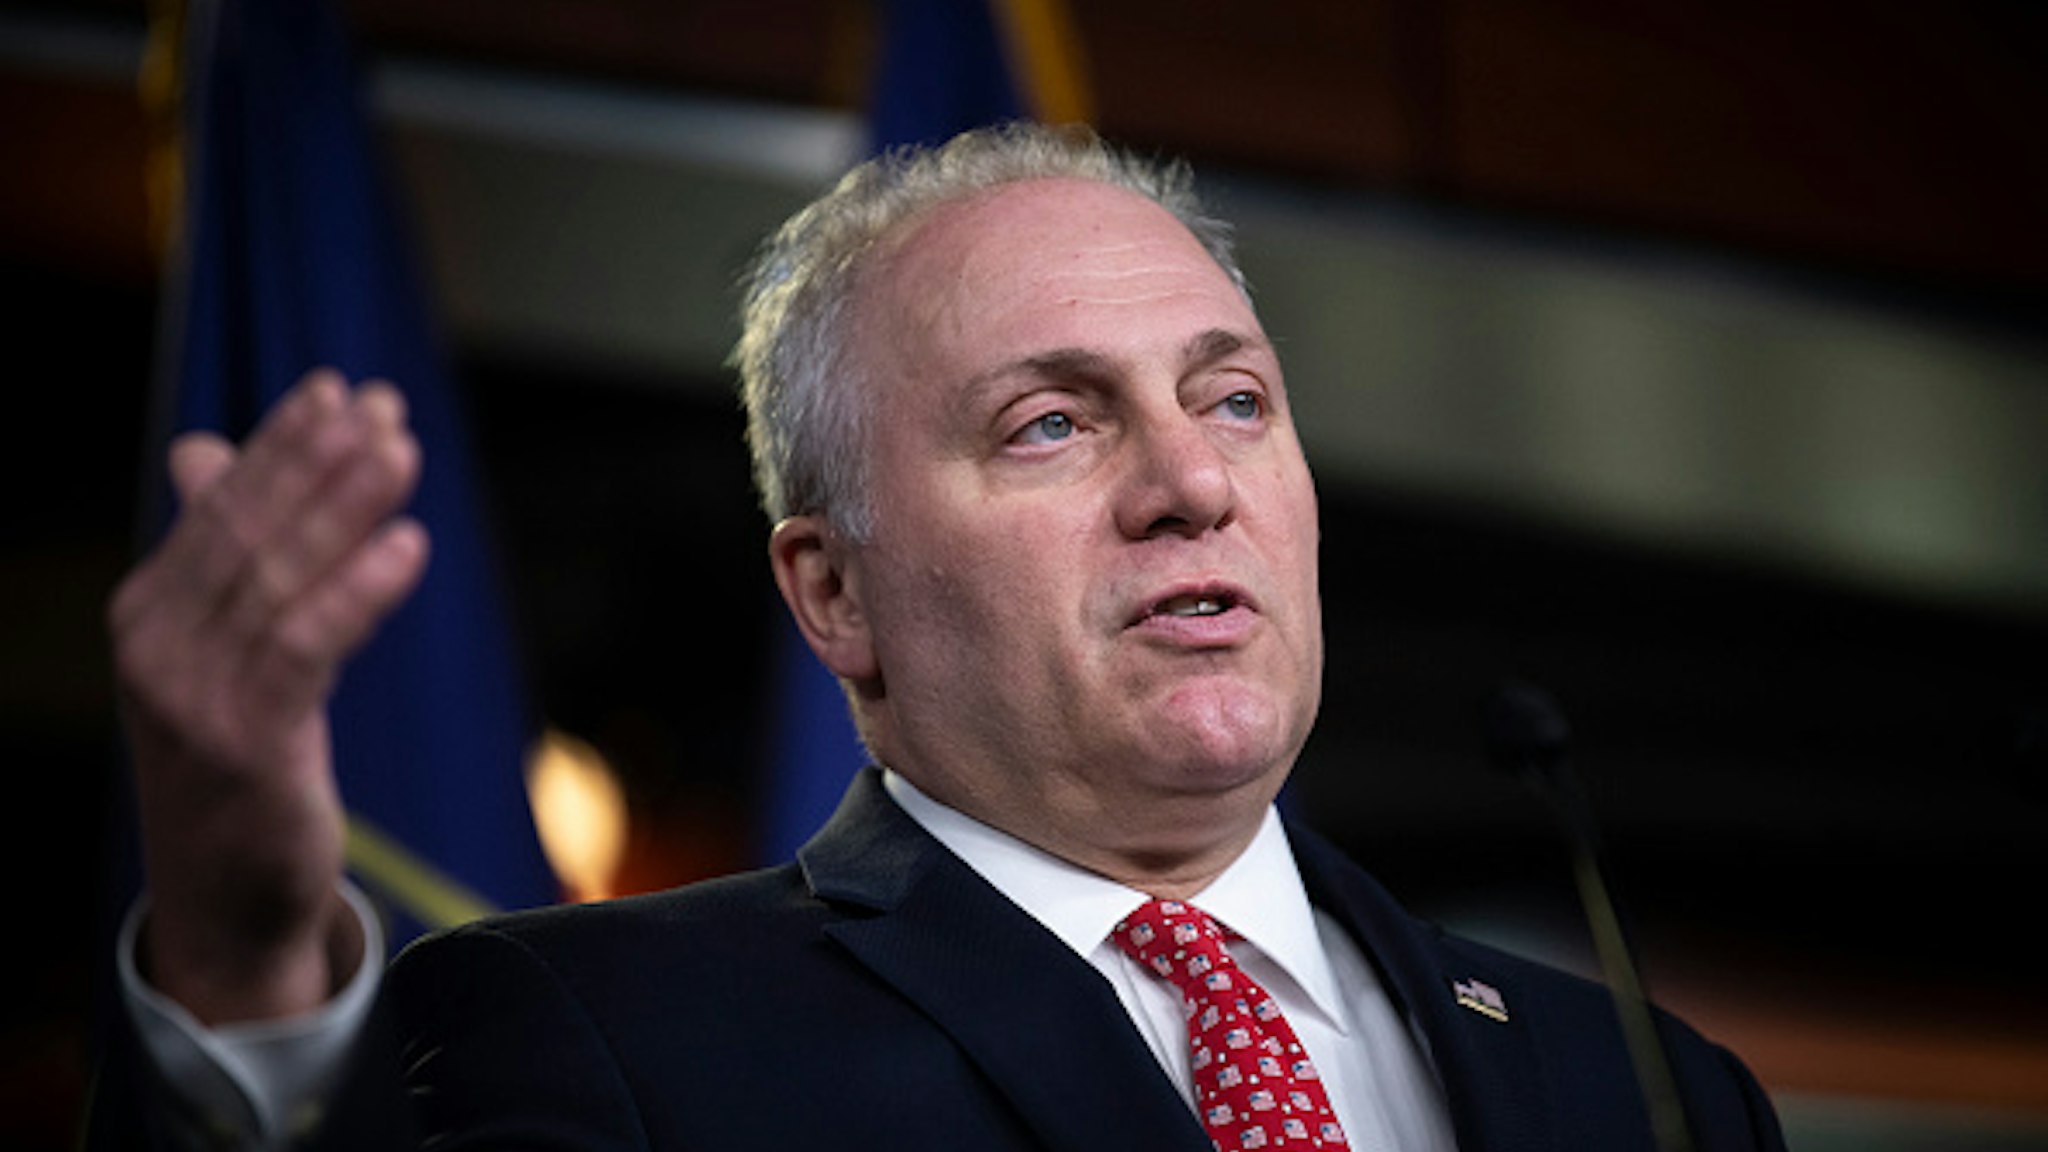 UNITED STATES - NOVEMBER 17: House Minority Whip Steve Scalise, R-La., speaks during a news conference with other House Republican leadership in Washington on Tuesday, Nov. 17, 2020.